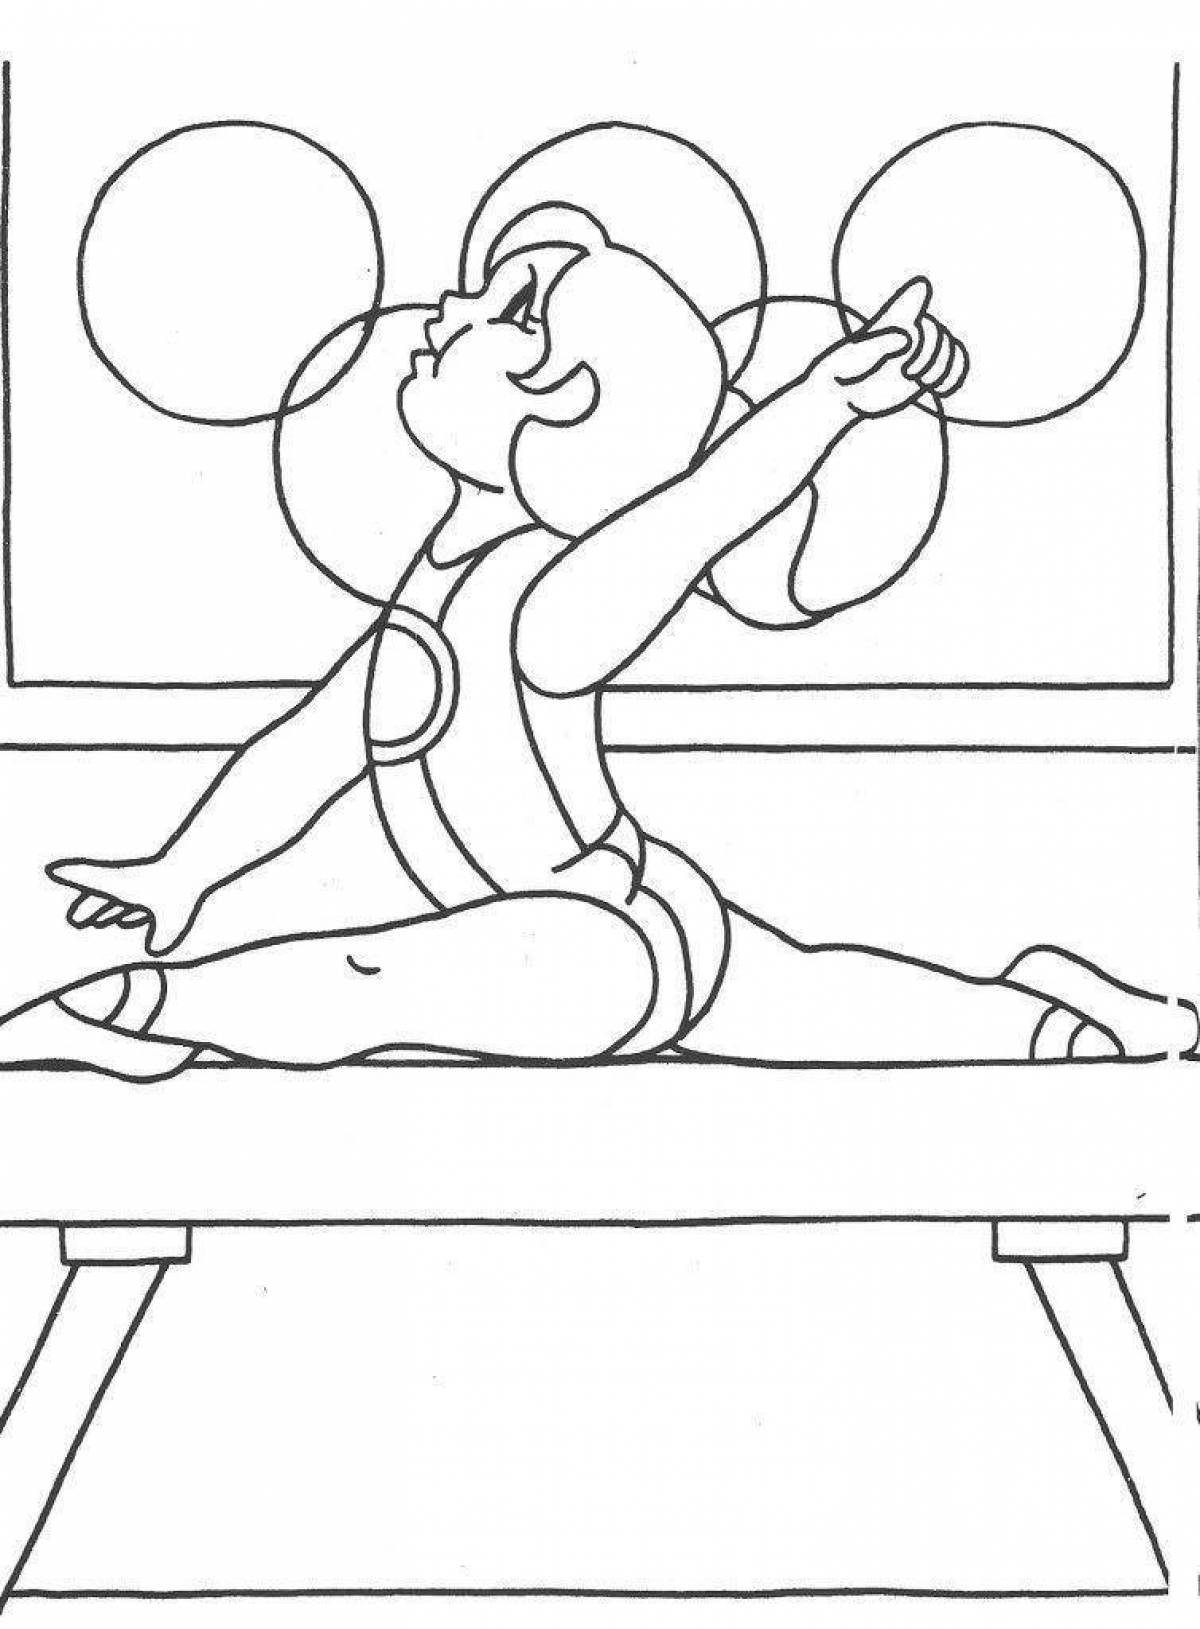 Glorious Gymnastics Coloring Book for Toddlers